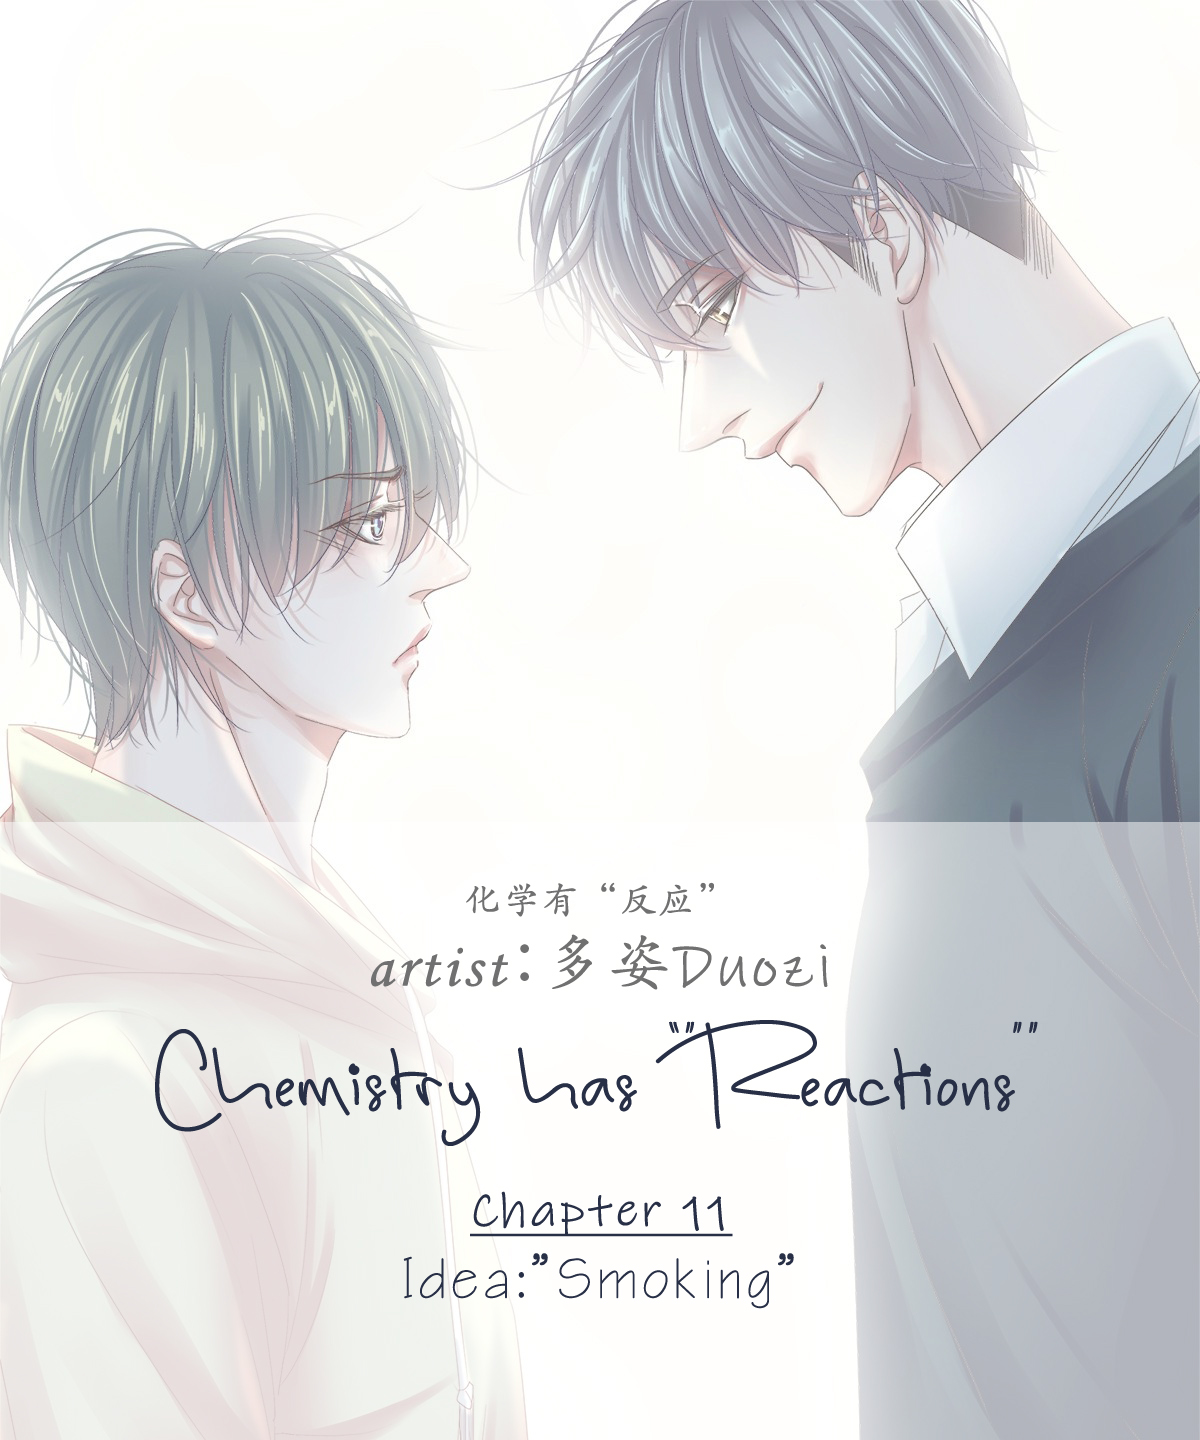 Chemistry has "Reactions" Vol. 1 Ch. 11